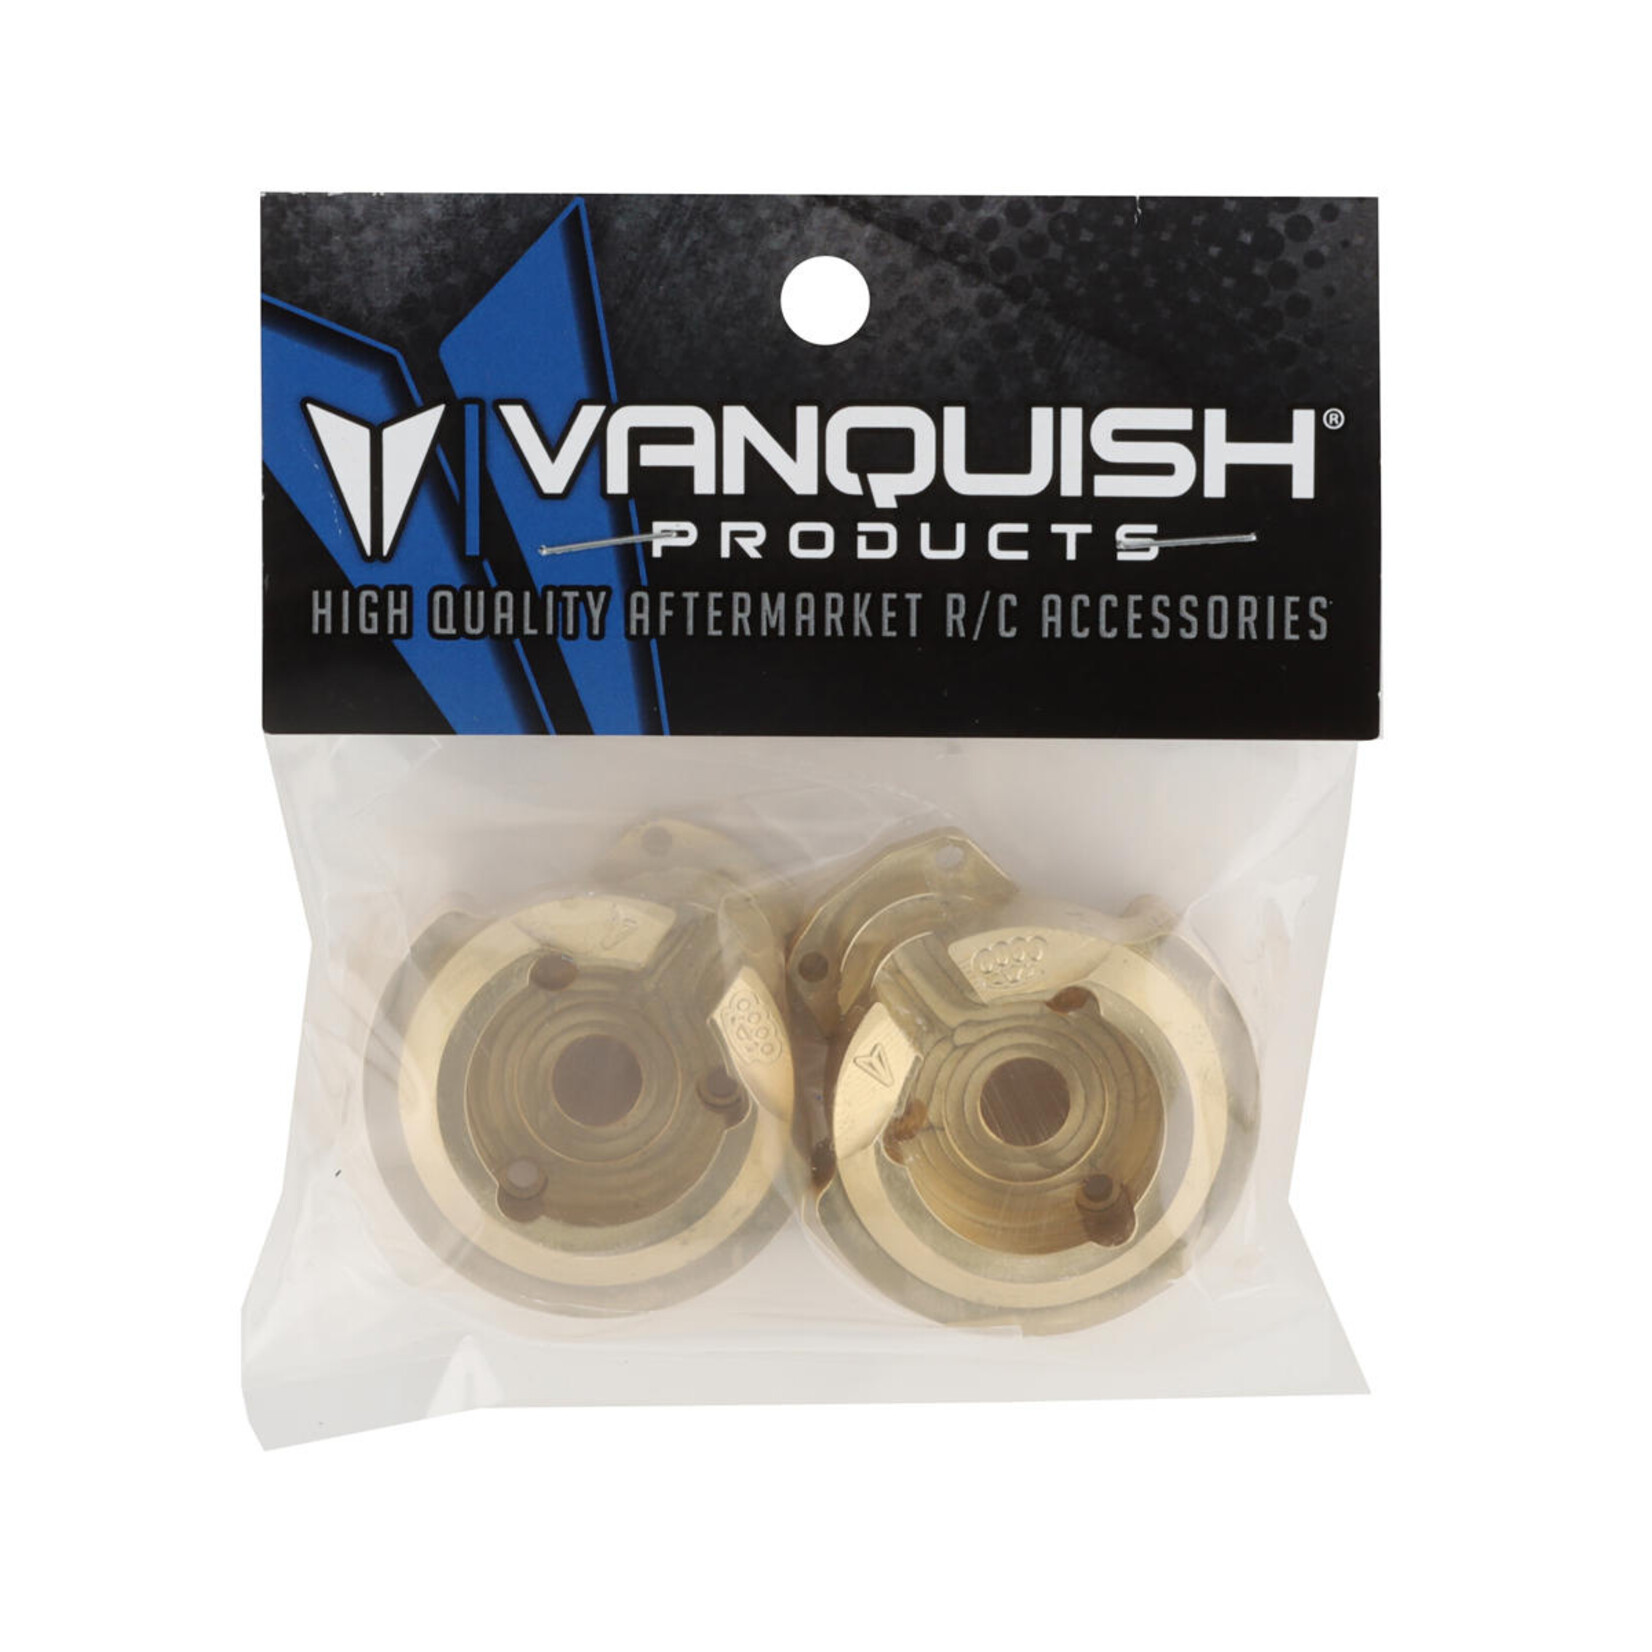 Vanquish Products Vanquish Products Brass F10 Portal Knuckle Cover Weights (2) (128g) #VPS08650